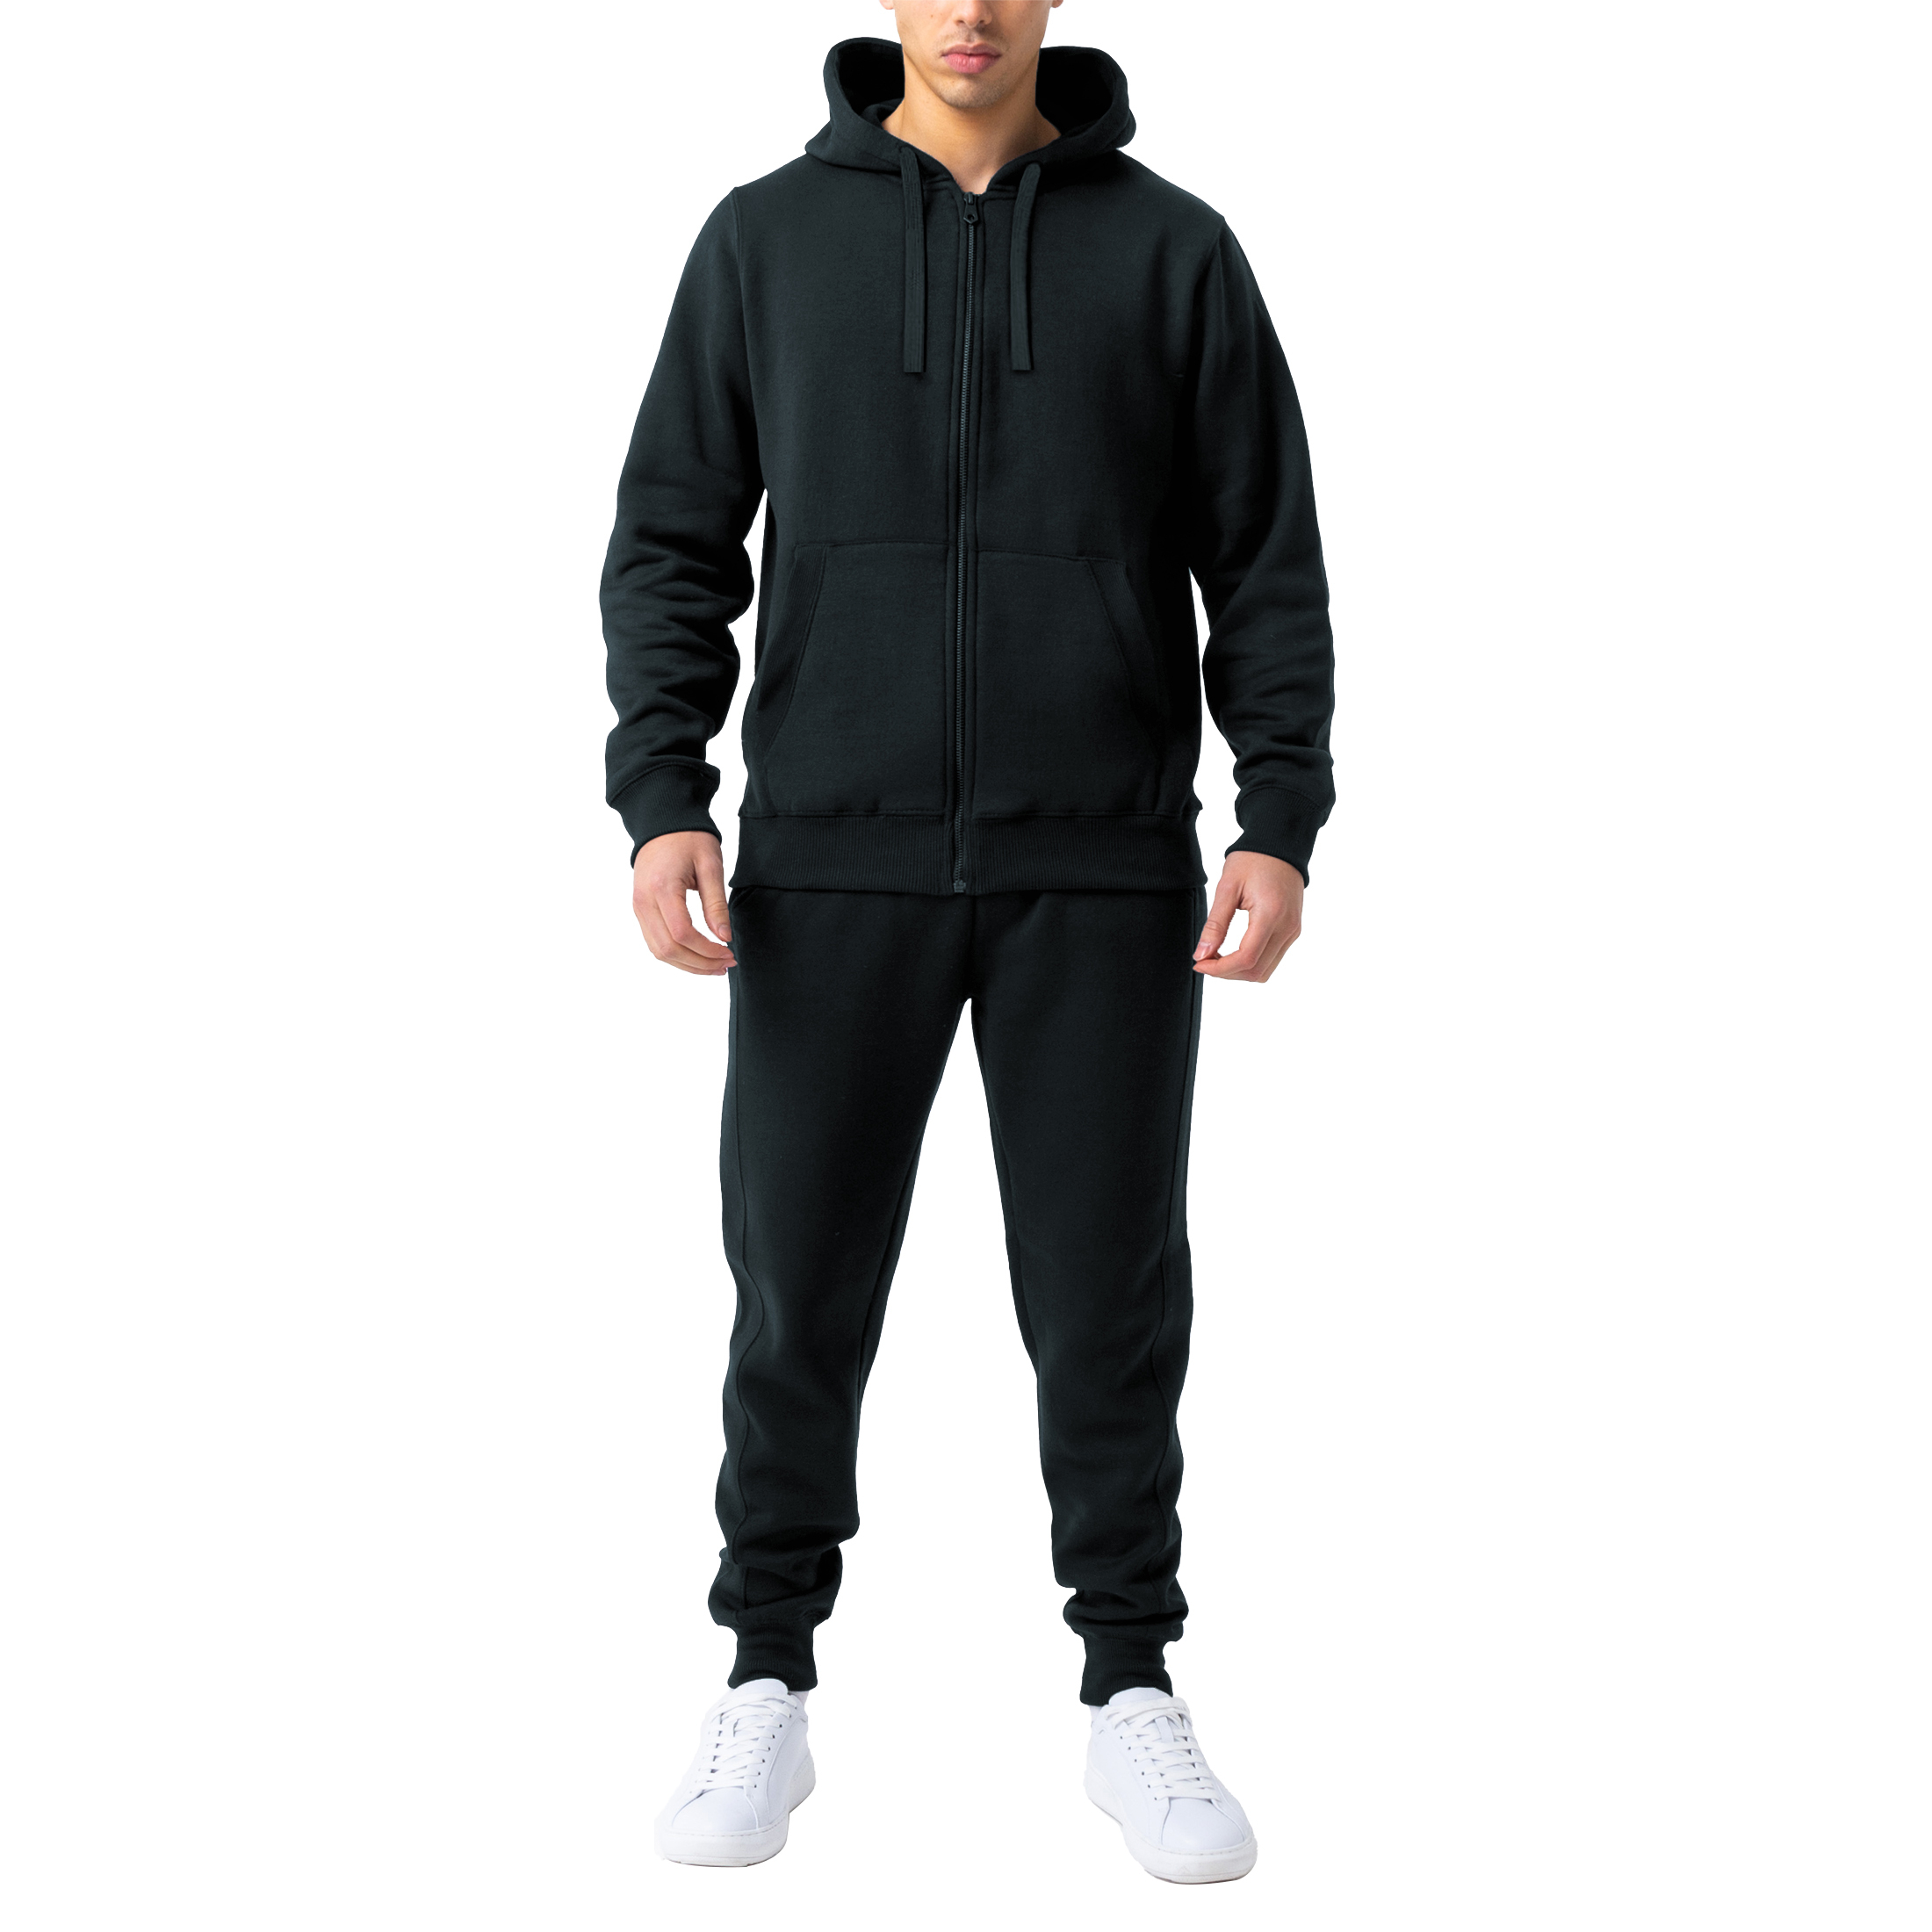 Men's Casual Jogging Athletic Active Full Zip Up Tracksuit - Black, 3X-Large